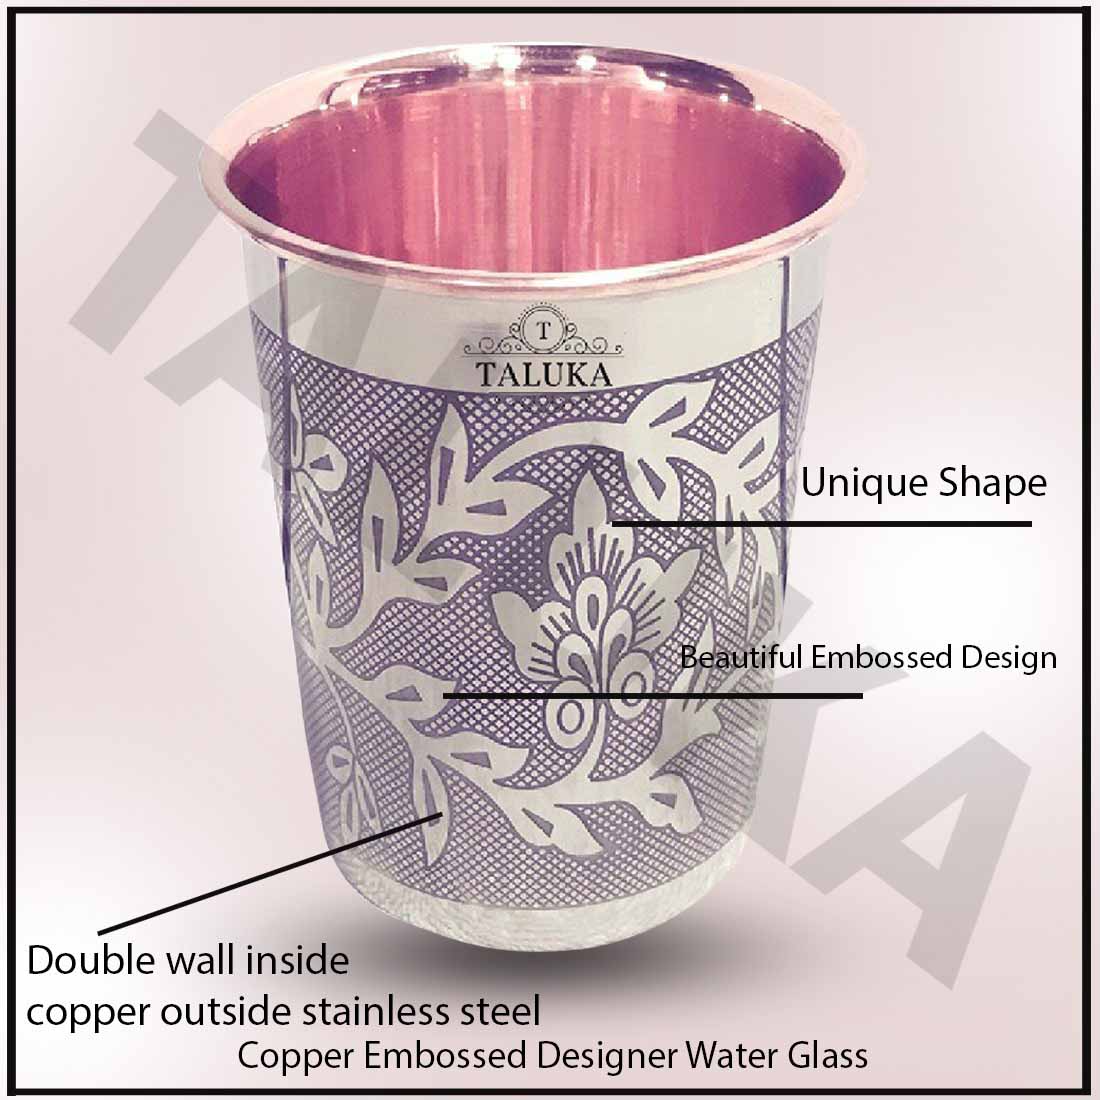 Stainless Steel Copper Glass Etching Embossed Design Tumbler Cup, Drinkware Serveware, Health Benefits Ayurveda Yoga, 4 inch Set of 1 Glass (Copper and Silver)